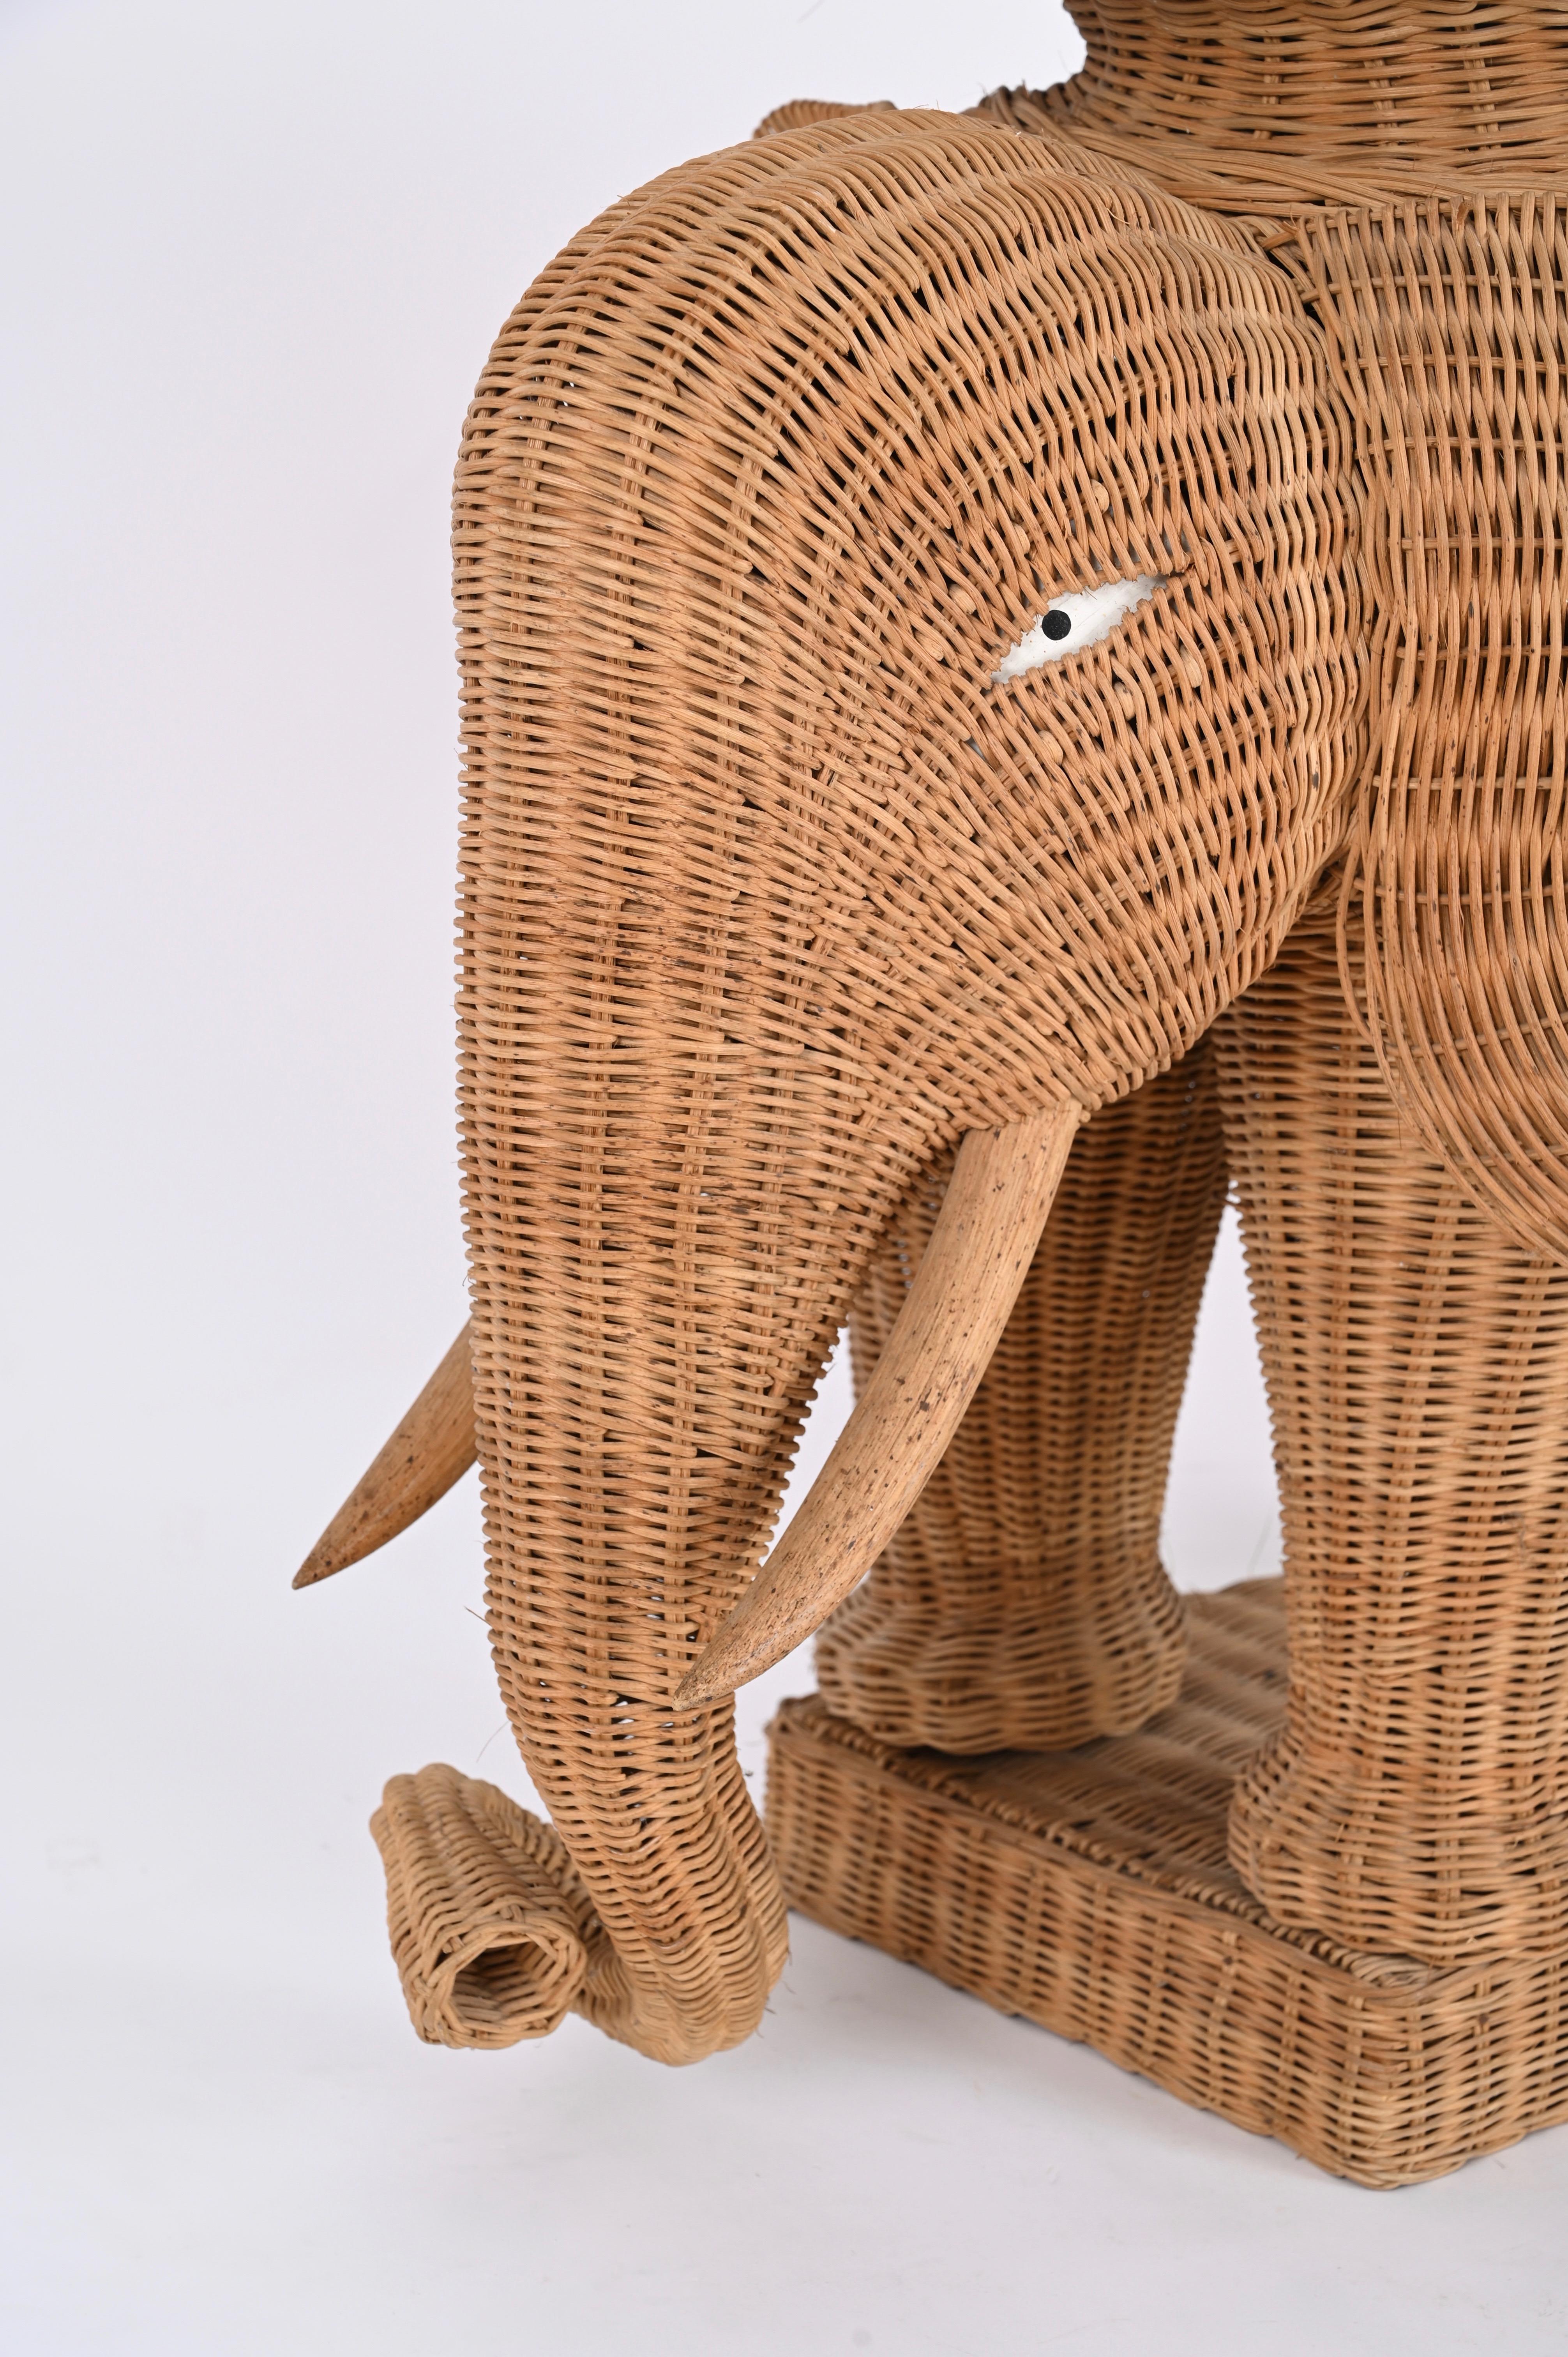 Hand-Crafted Large Rattan and Wicker Elephant Side Table by Vivai del Sud, Italy 1970s